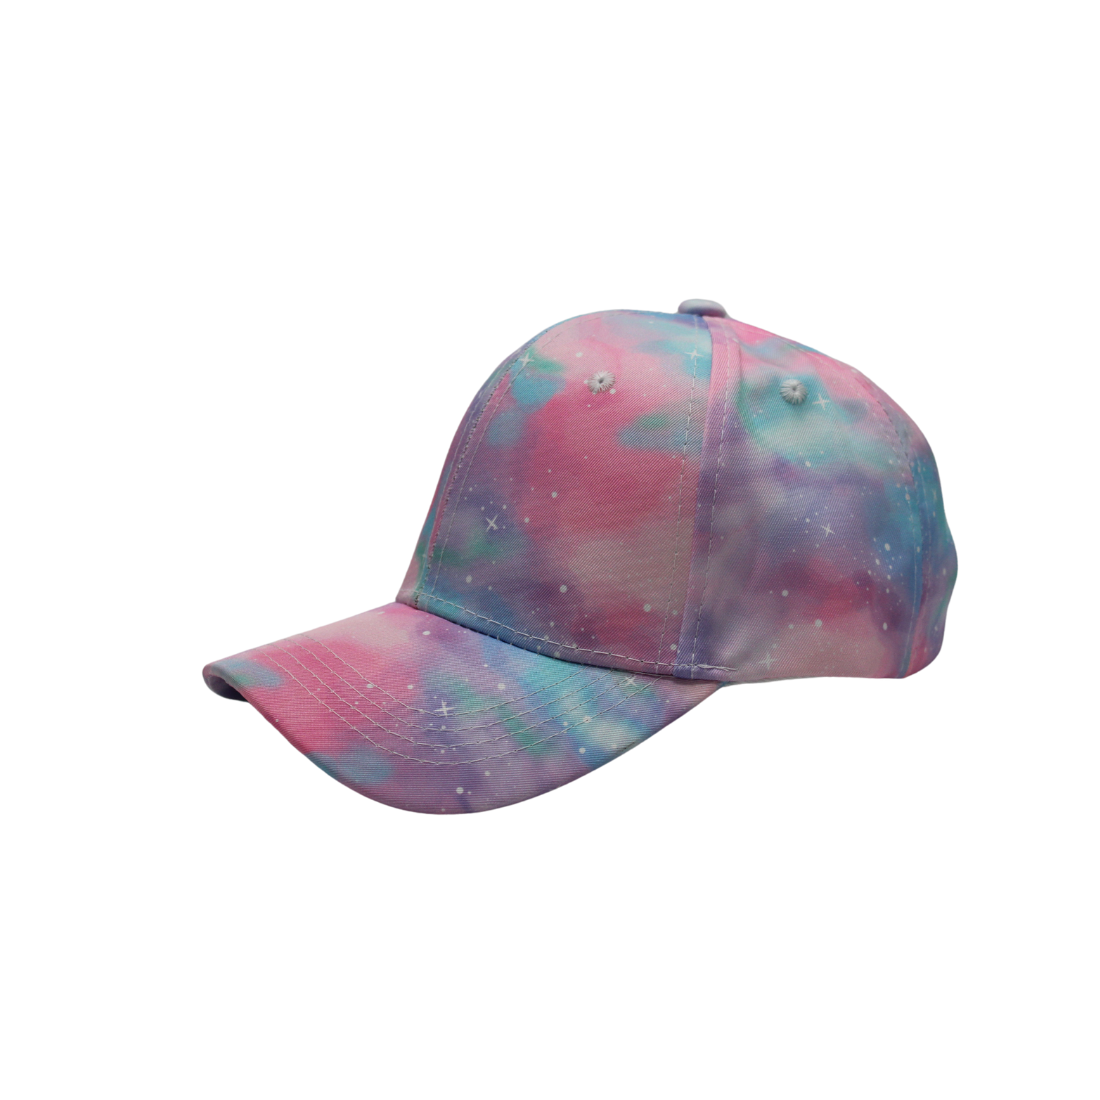 Unisex Youth Printed Adjustable Caps